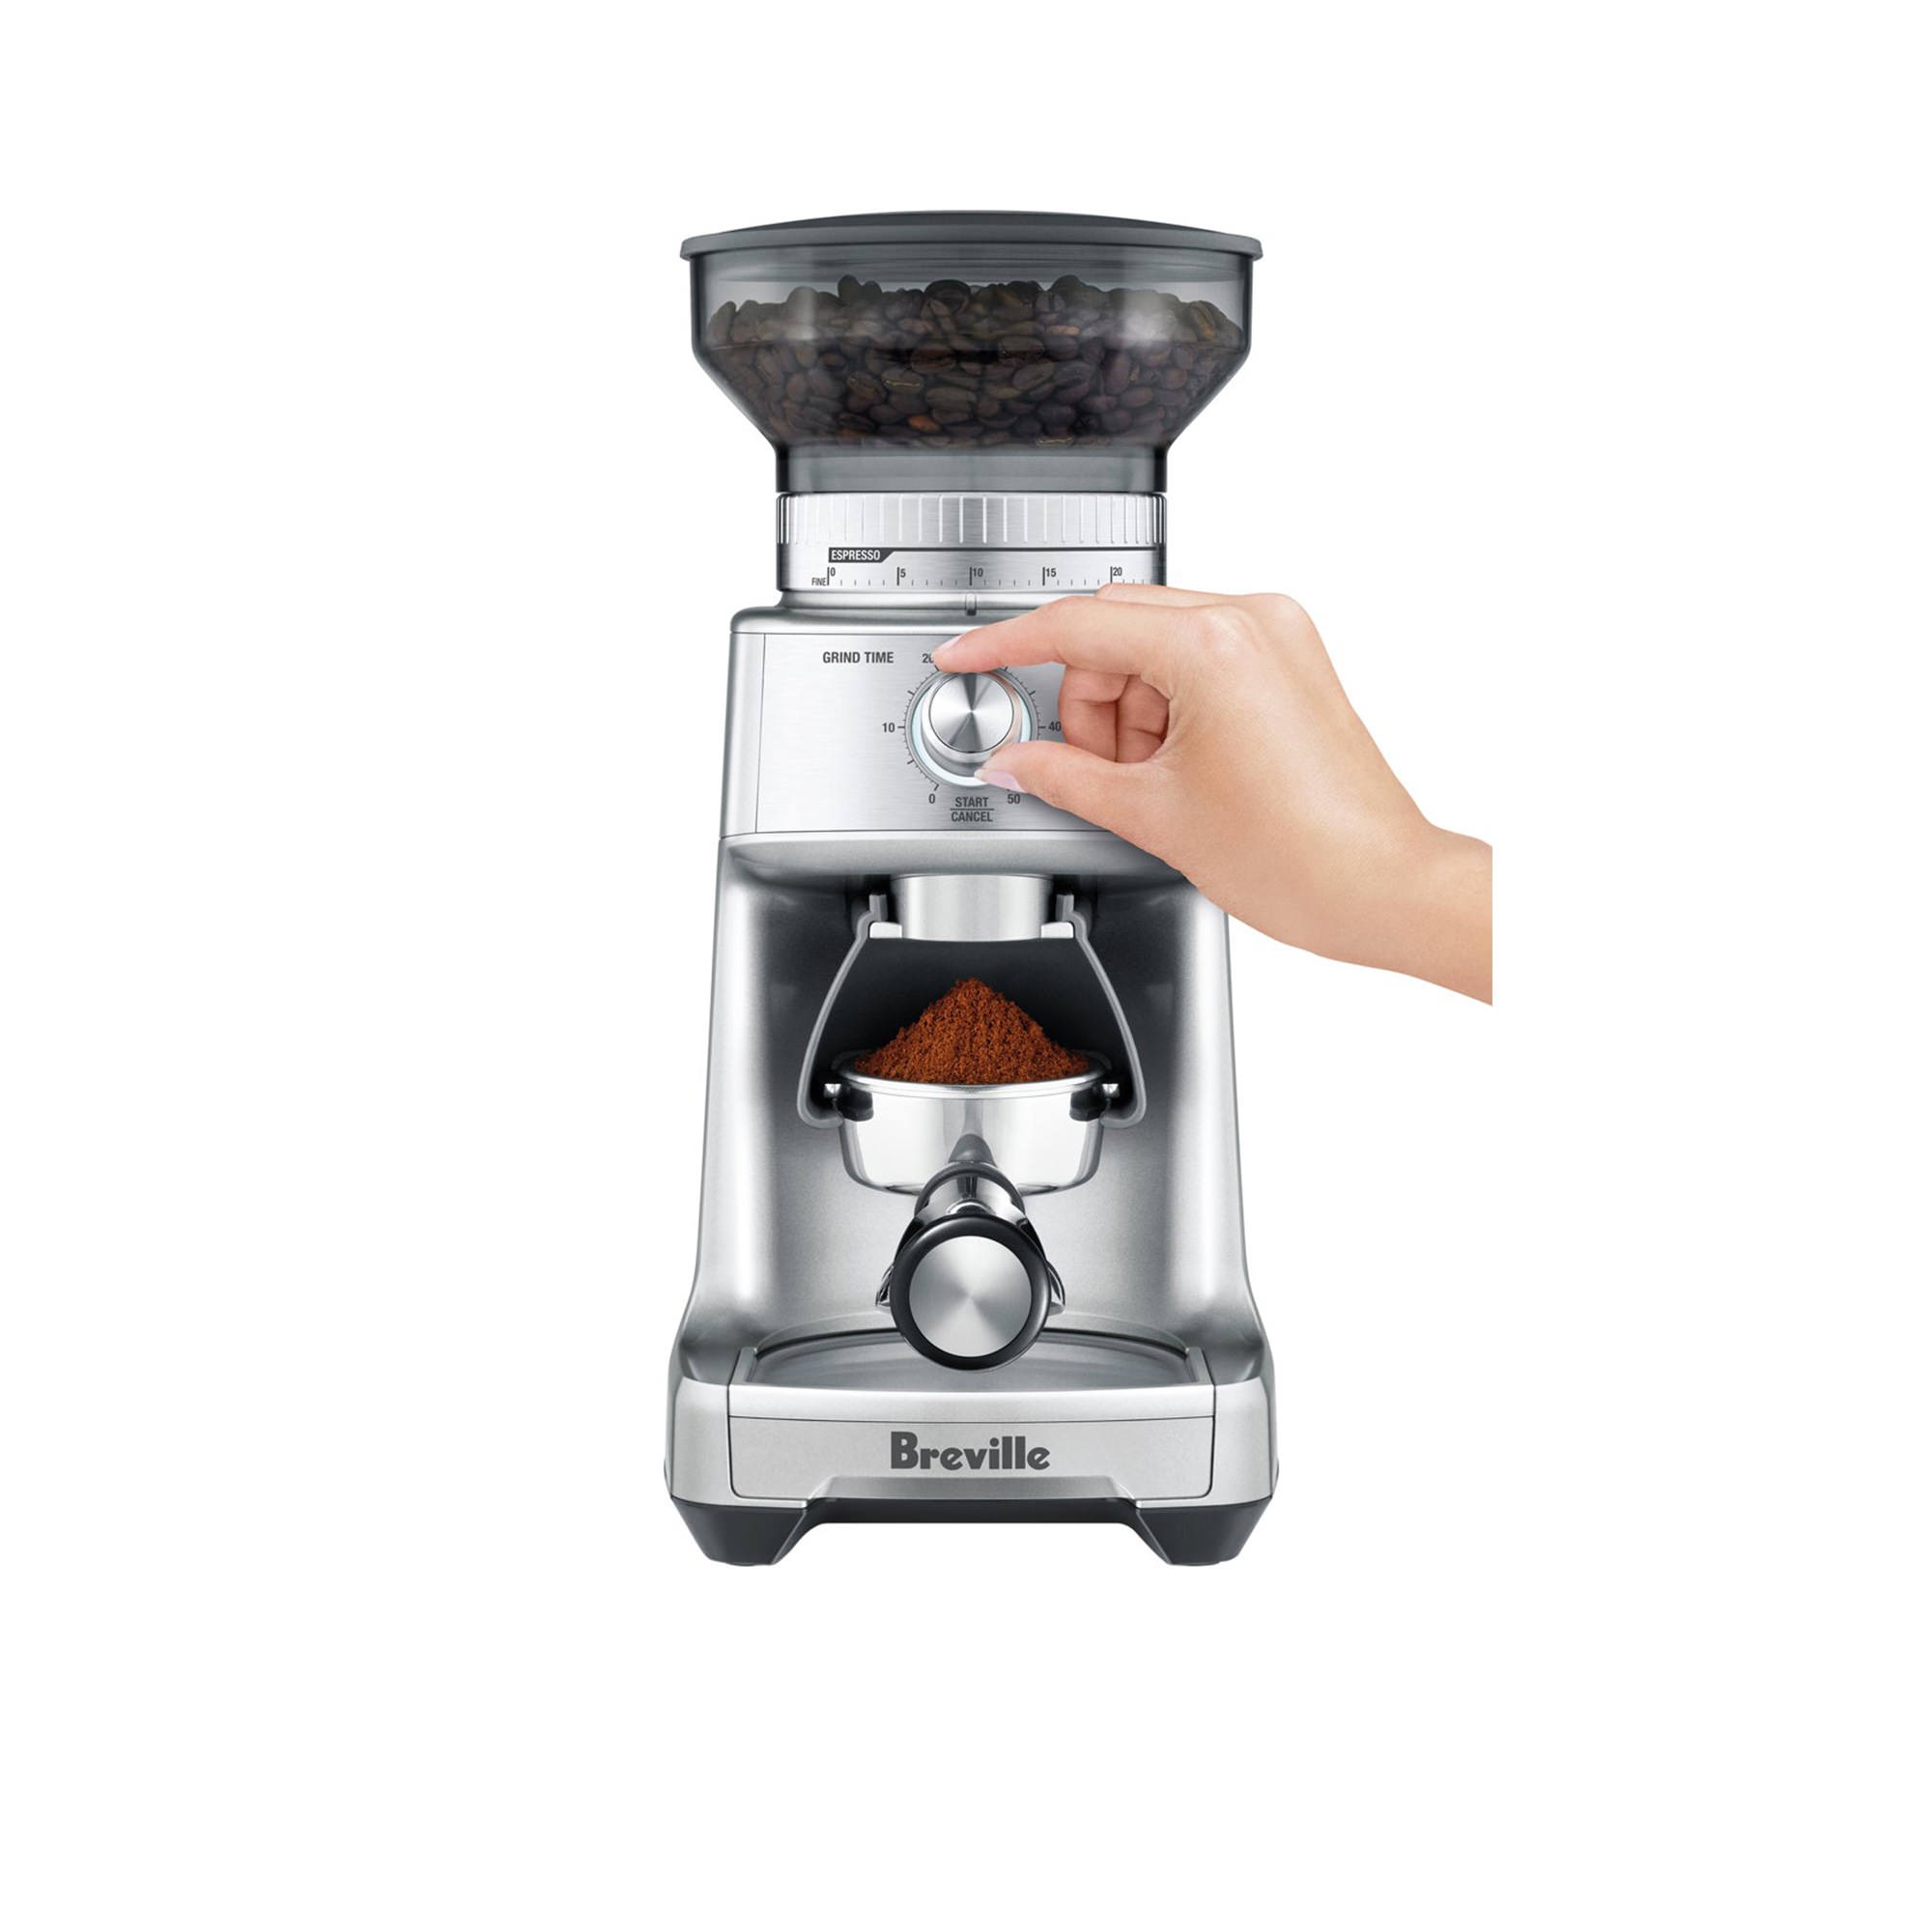 Breville The Dose Control Pro Coffee Grinder Brushed Stainless Steel Image 2